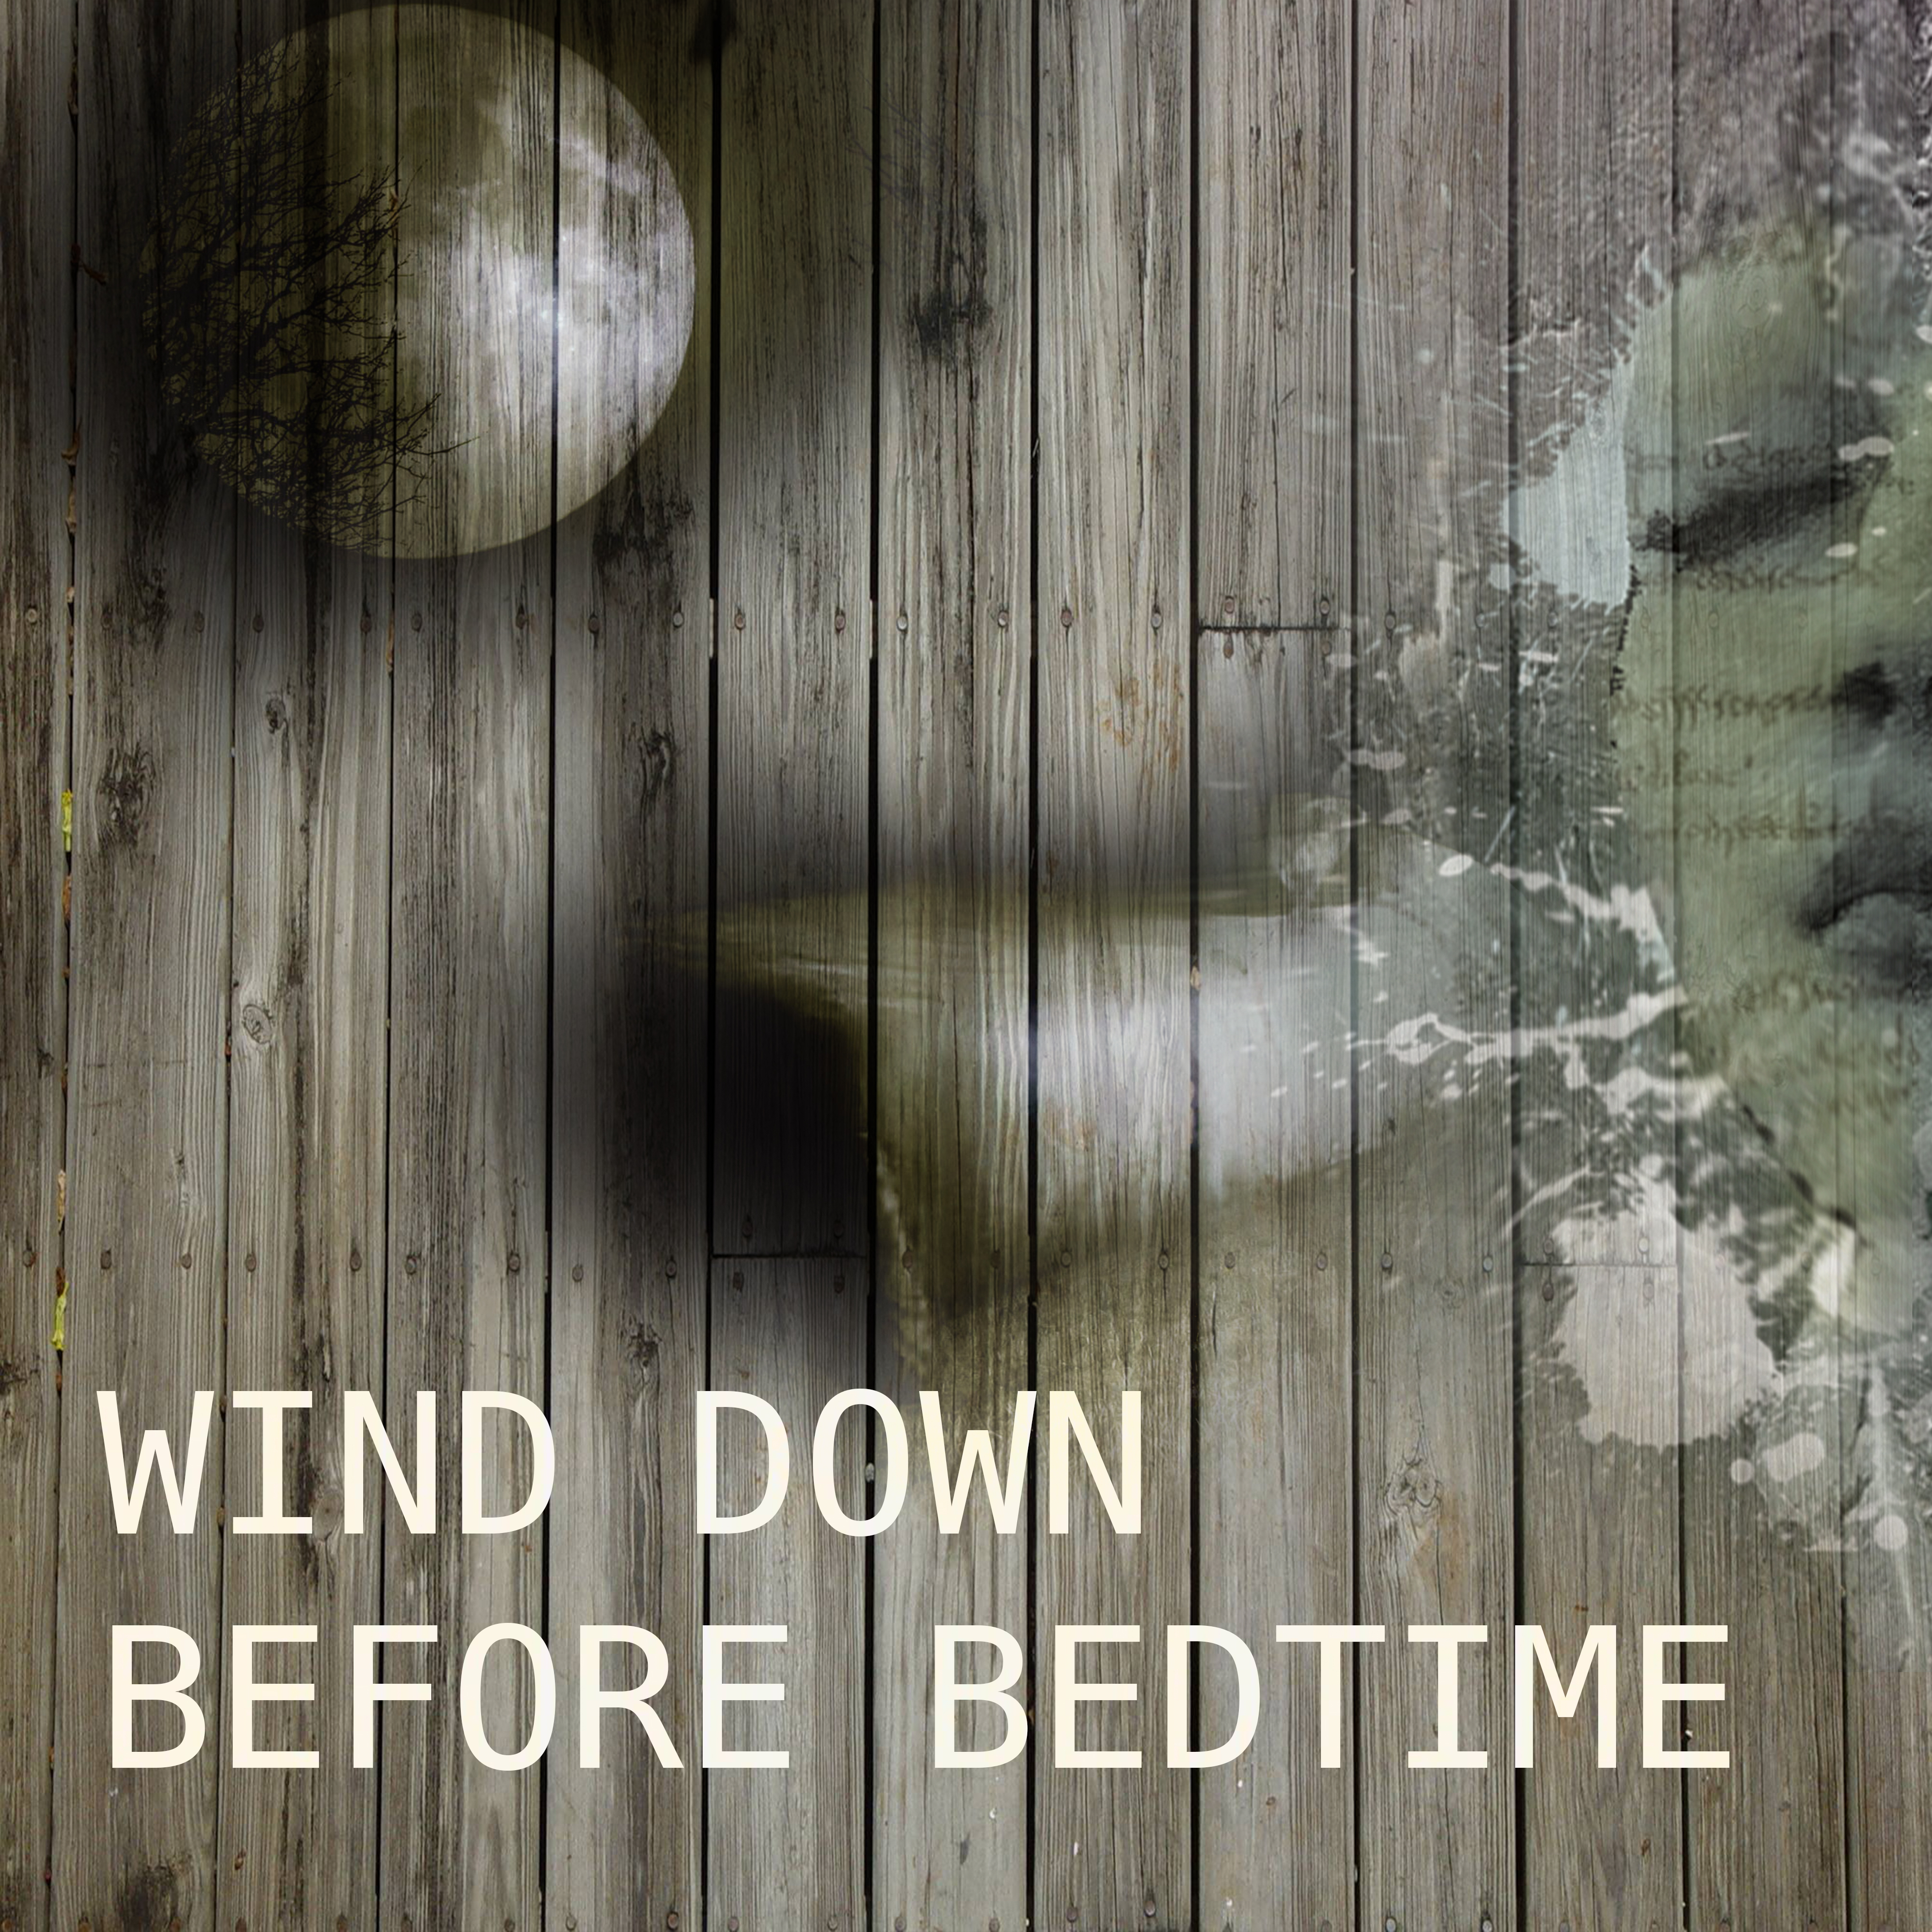 Wind Down Before Bedtime - Relaxing Sounds and Long Sleeping Songs to Help You Relax at Night, Healing Through Sound and Touch, New Age Music and Nature Sounds for Stress Relief